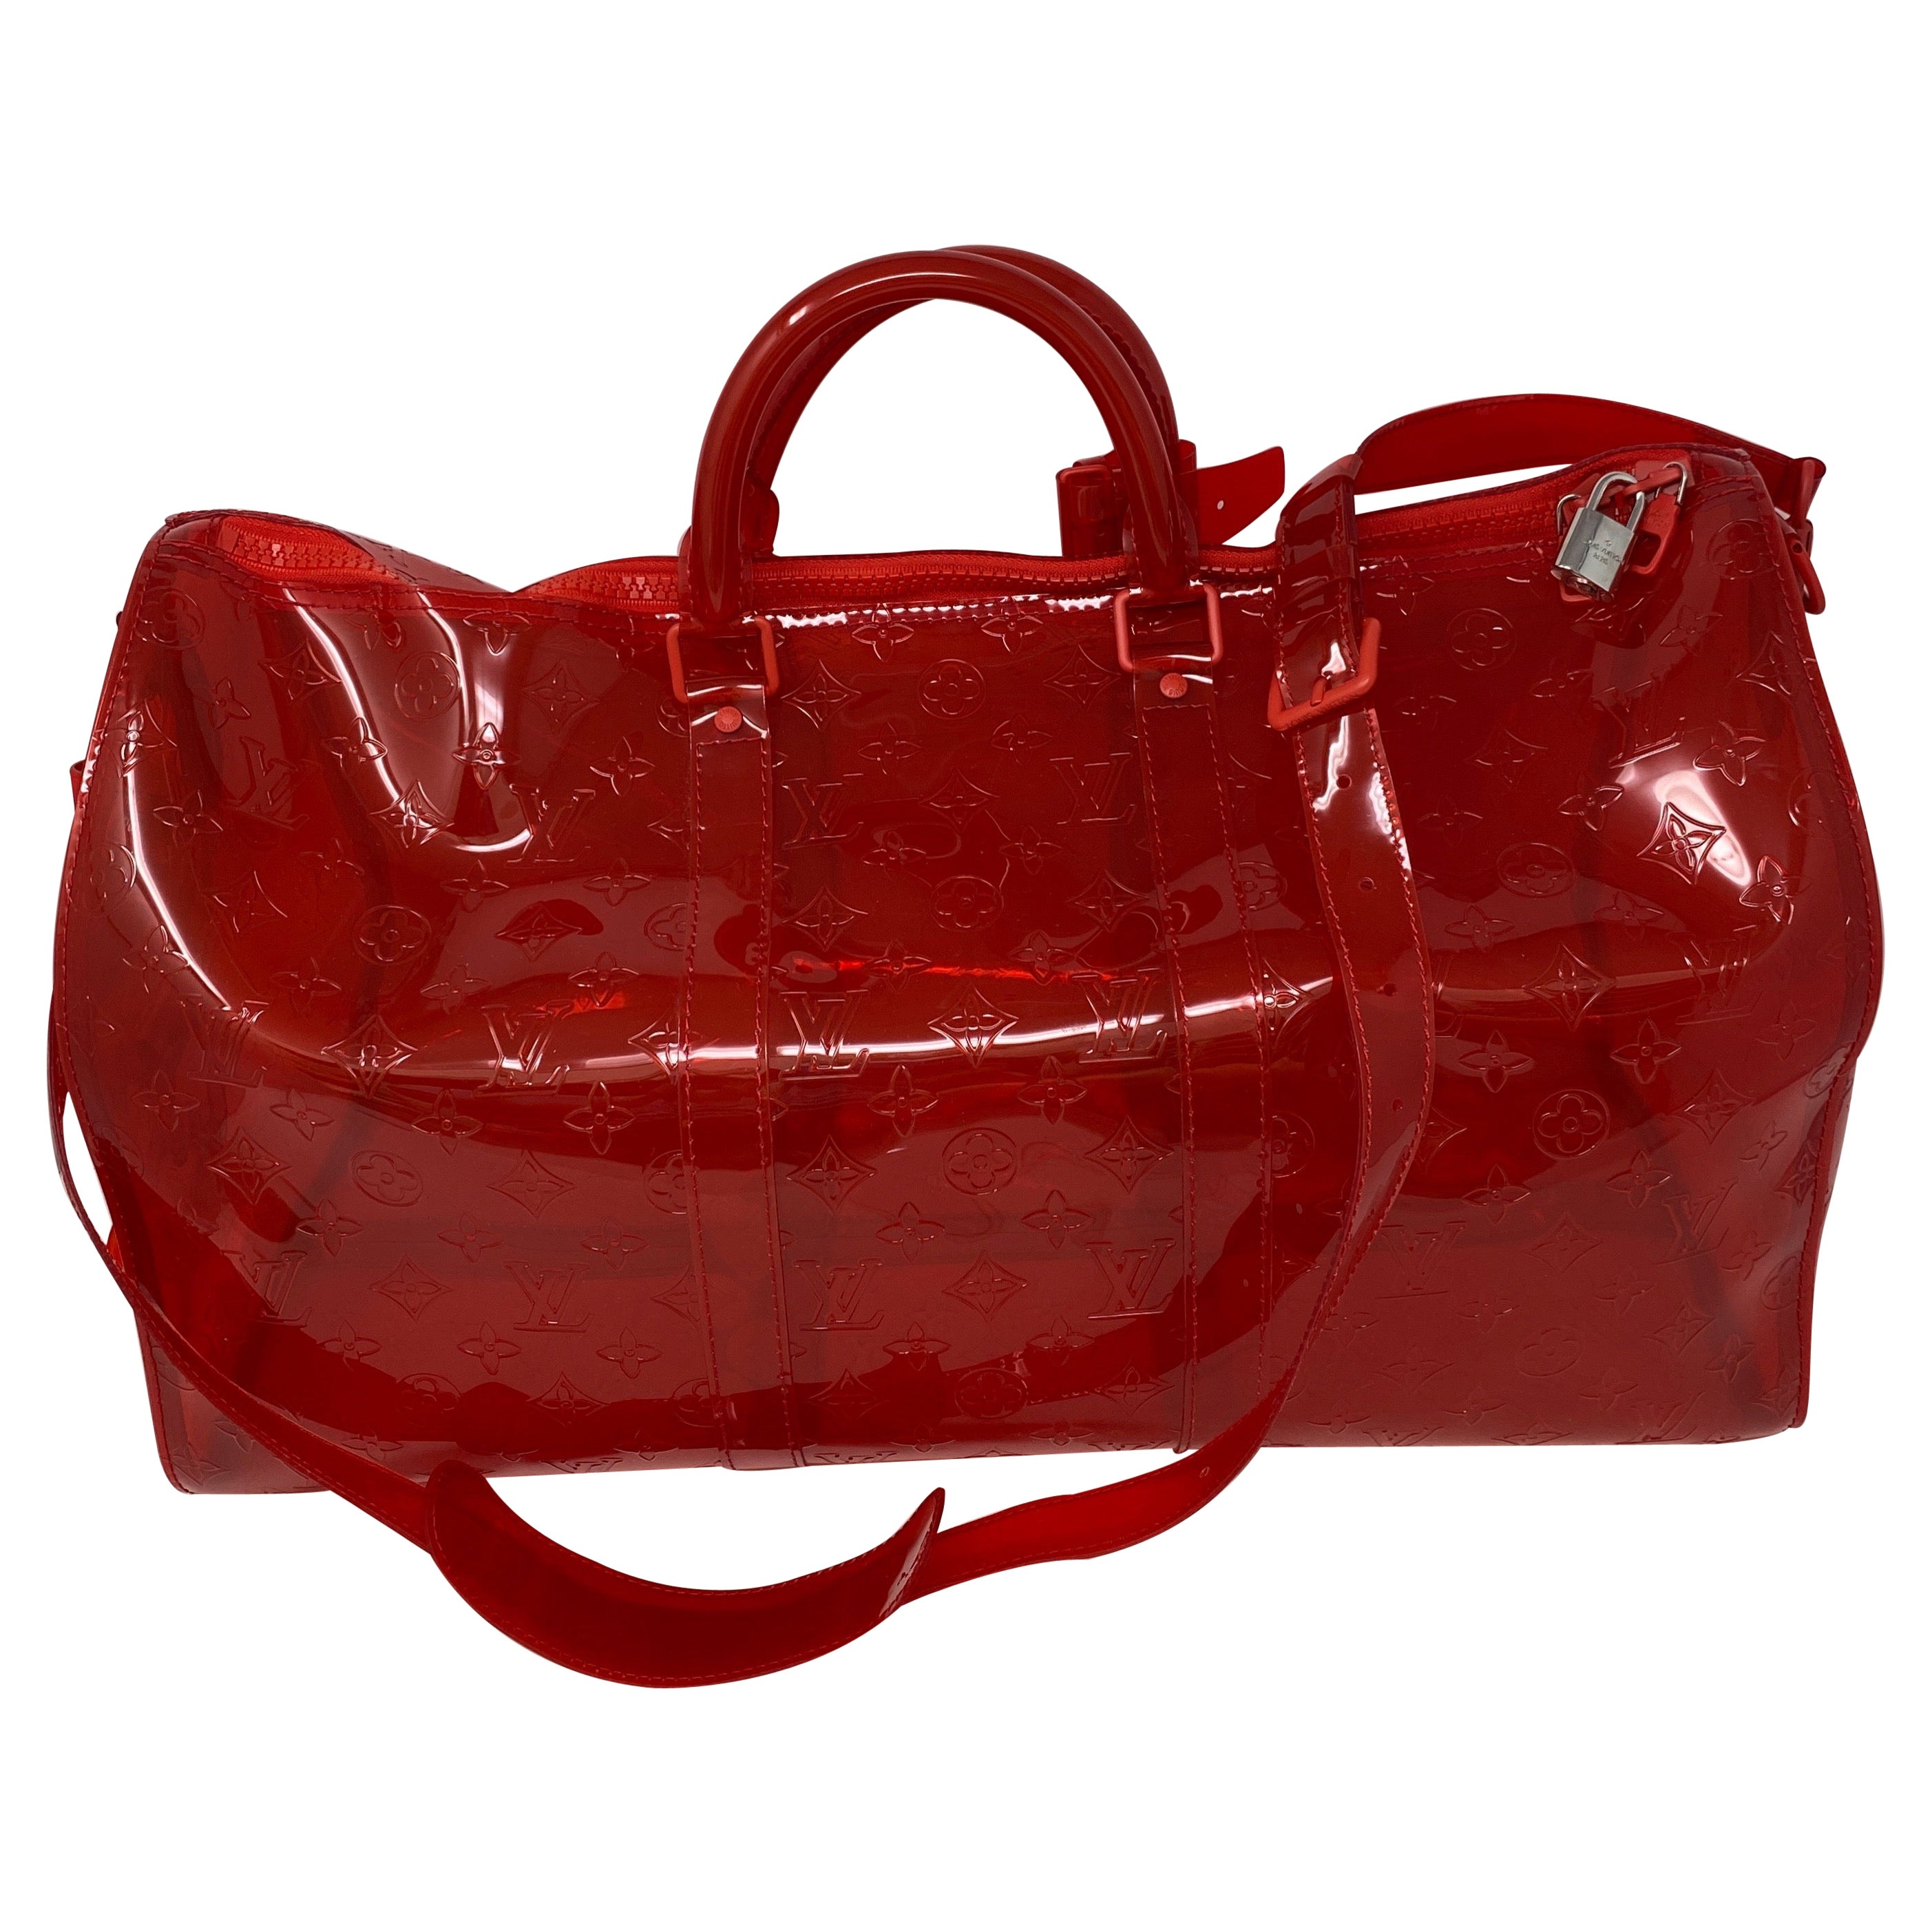 Clear Plastic Louis Vuitton Bag - For Sale on 1stDibs